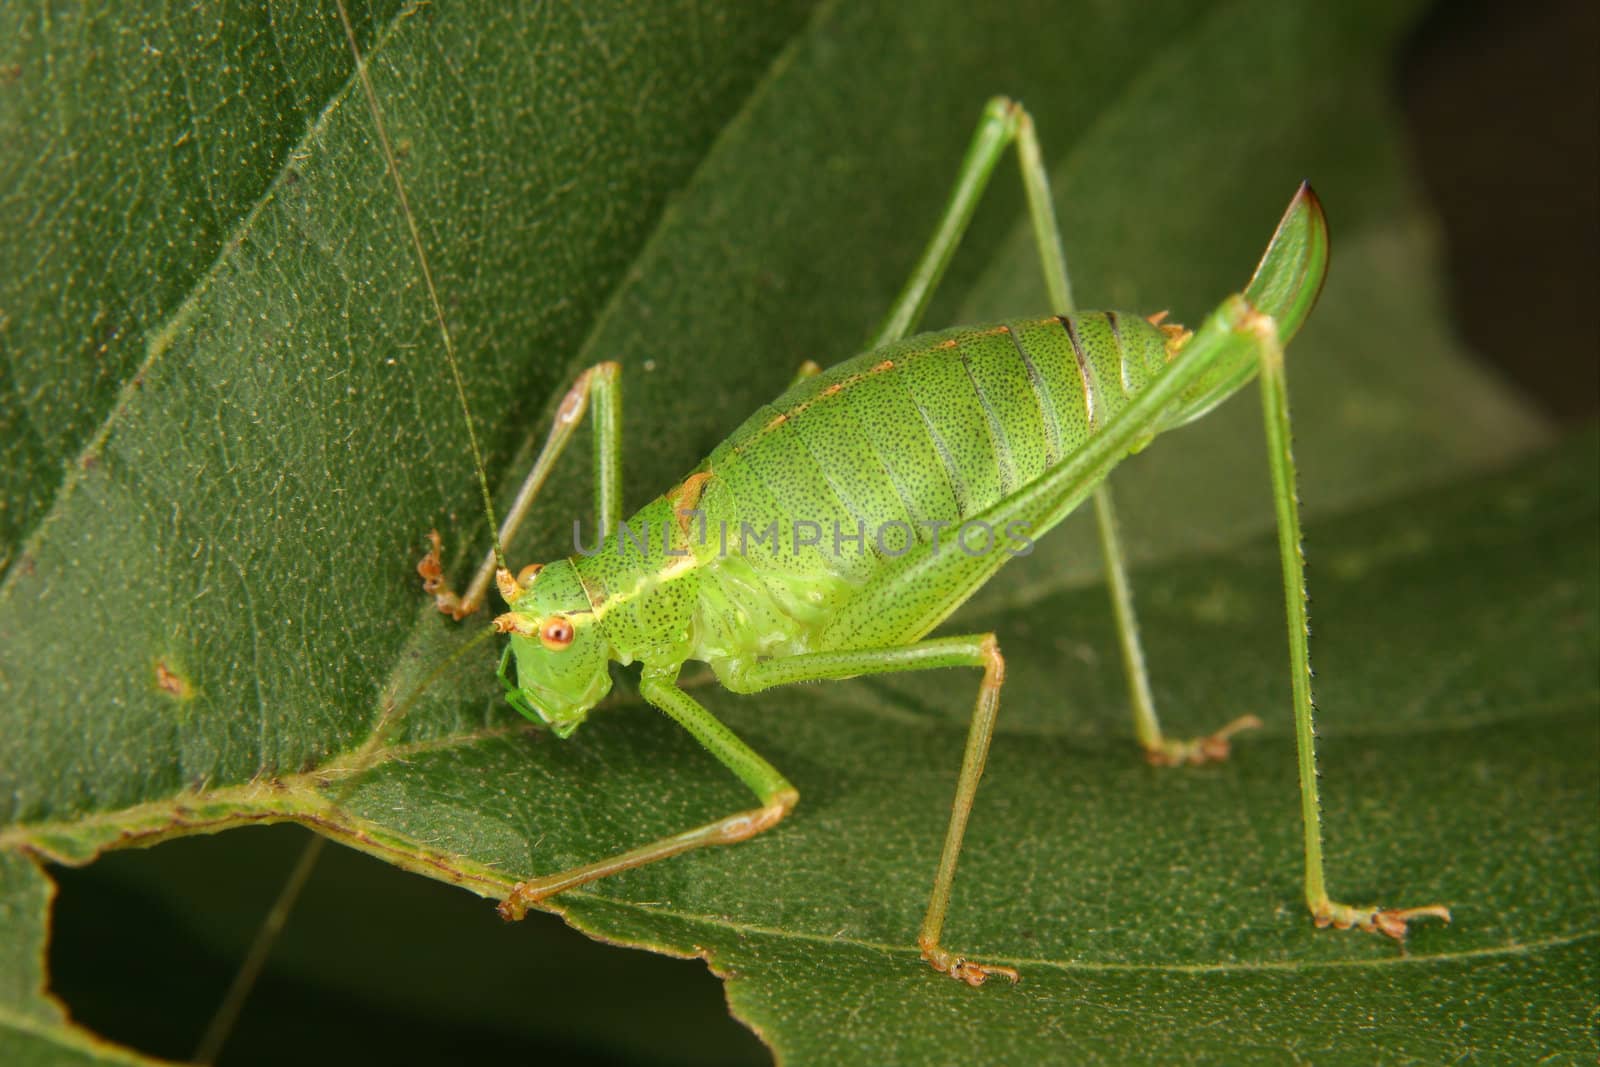 Speckled bush-cricket (Leptophyes punctatissima) by tdietrich